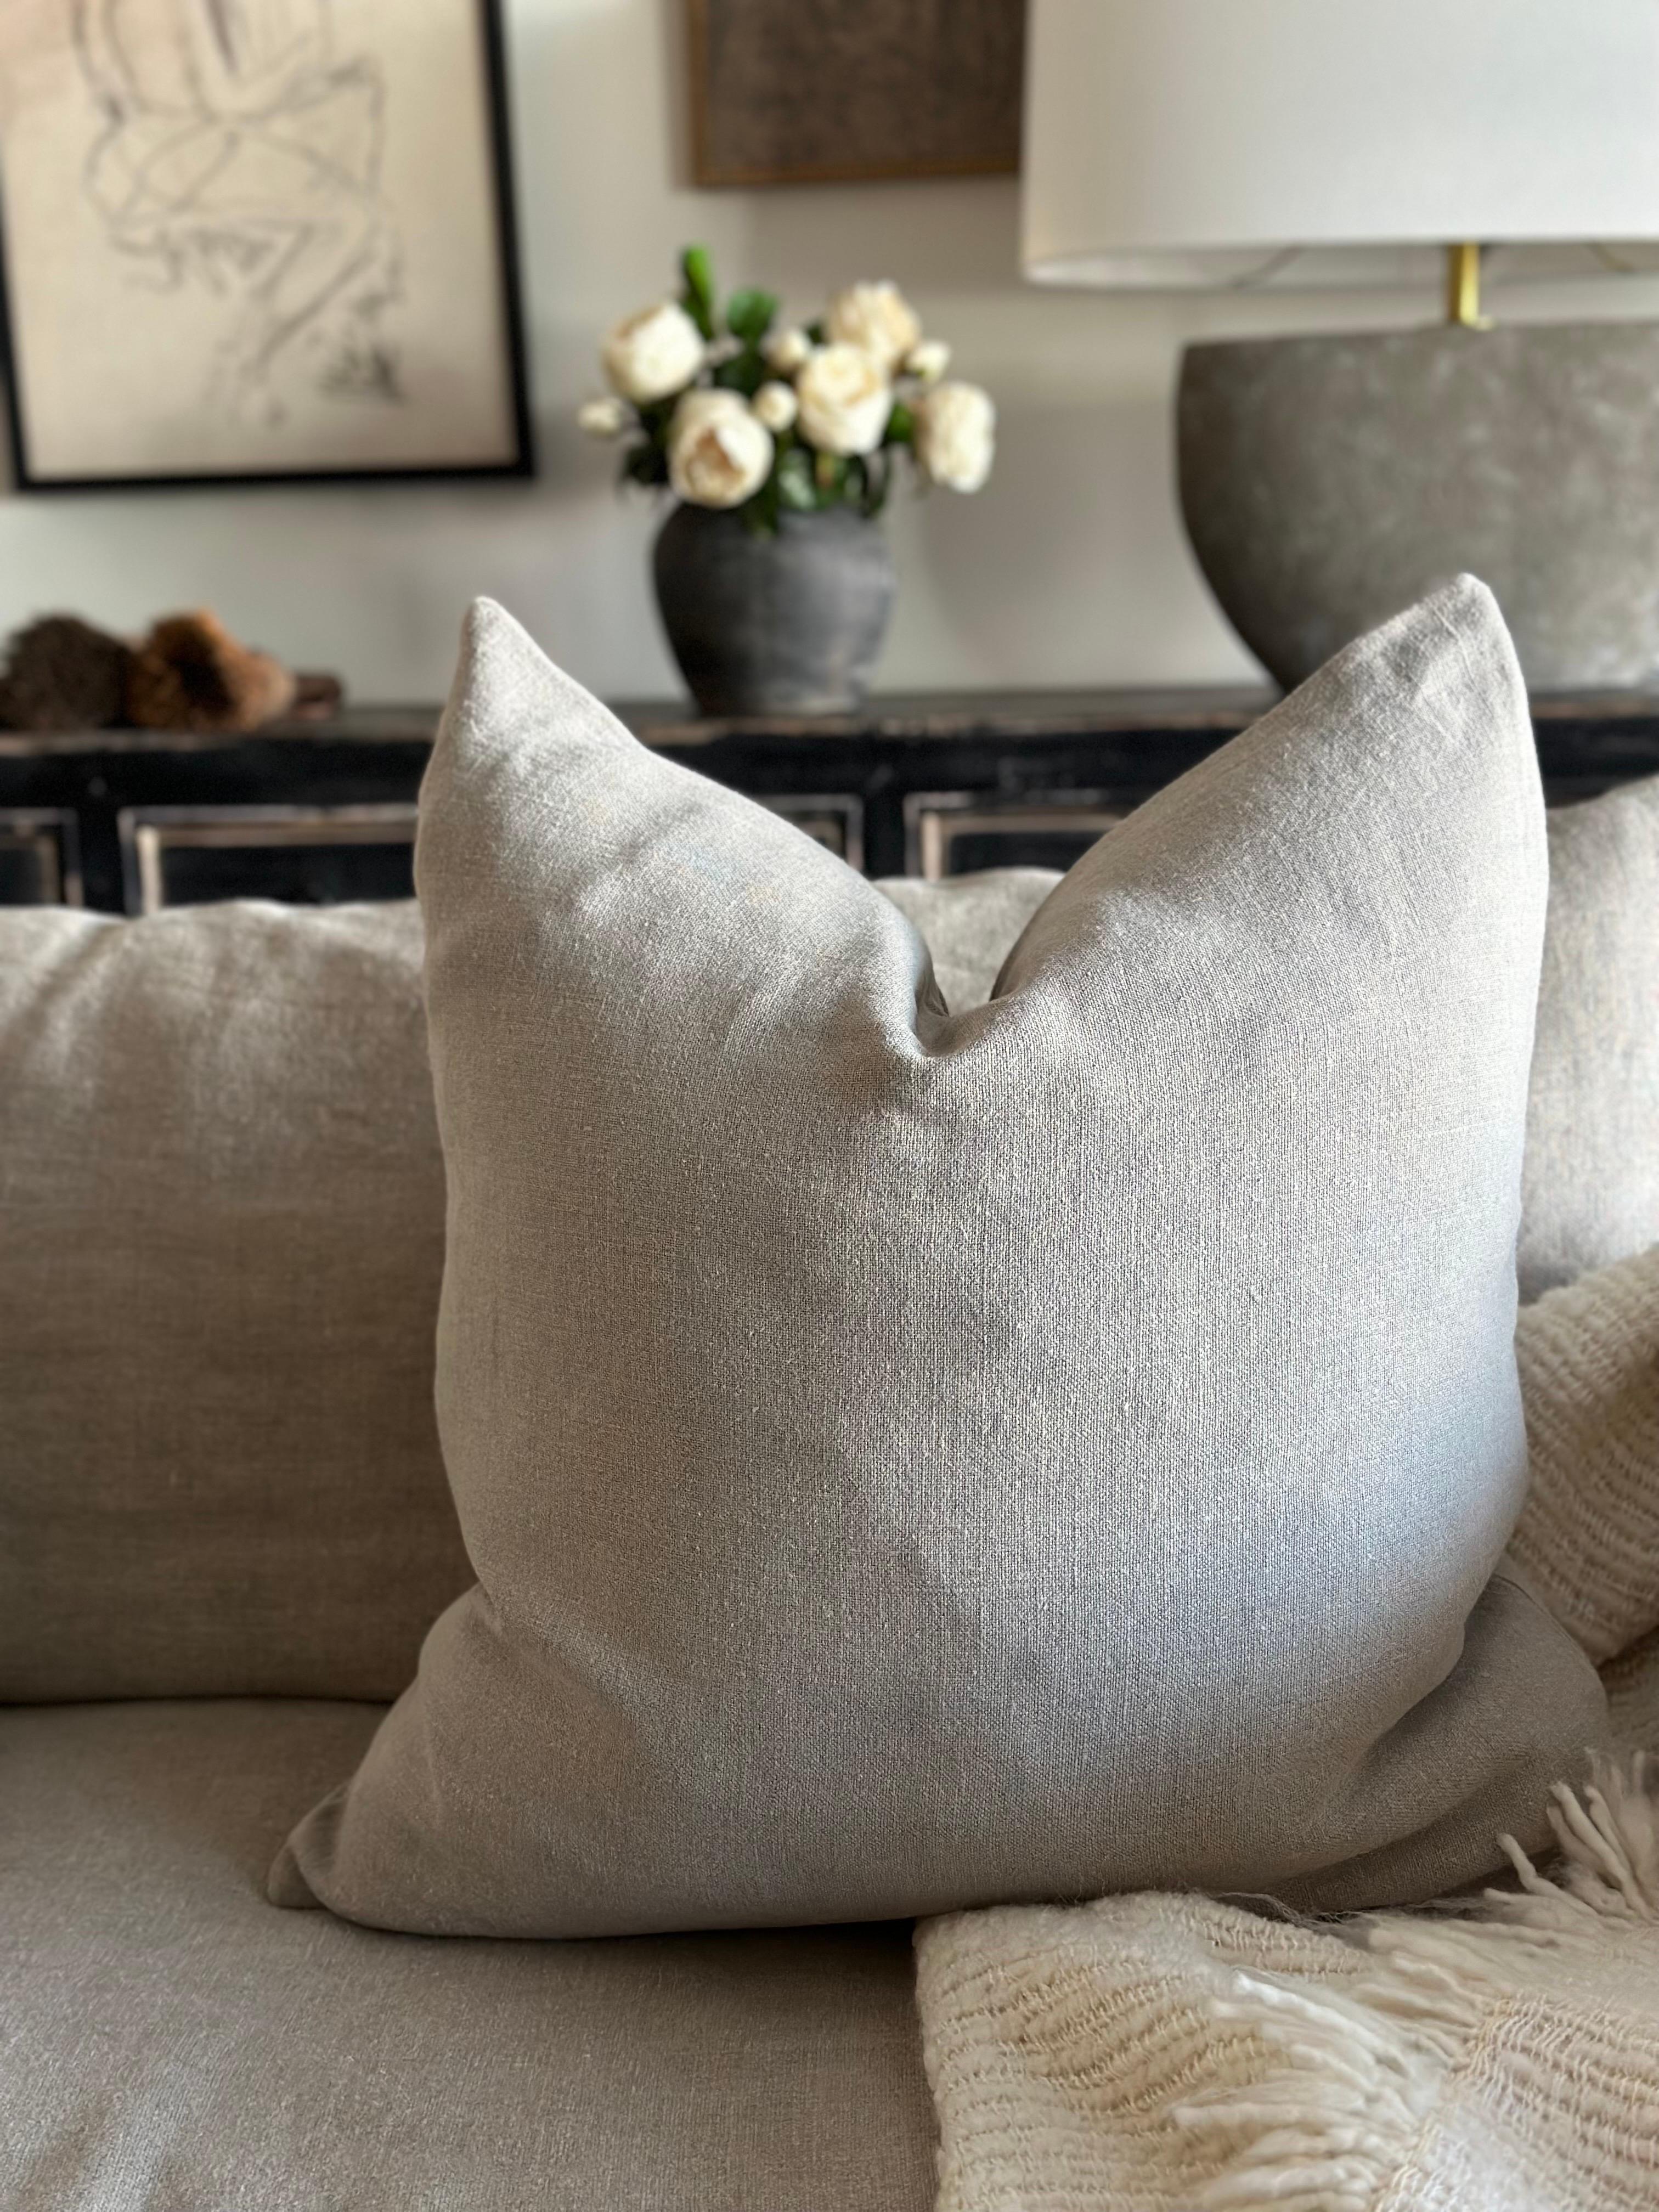 100% Linen
Made in Belgium
Natural Flax Linen Pillow cover with overlocked seams and hidden zipper closure.
Size 25